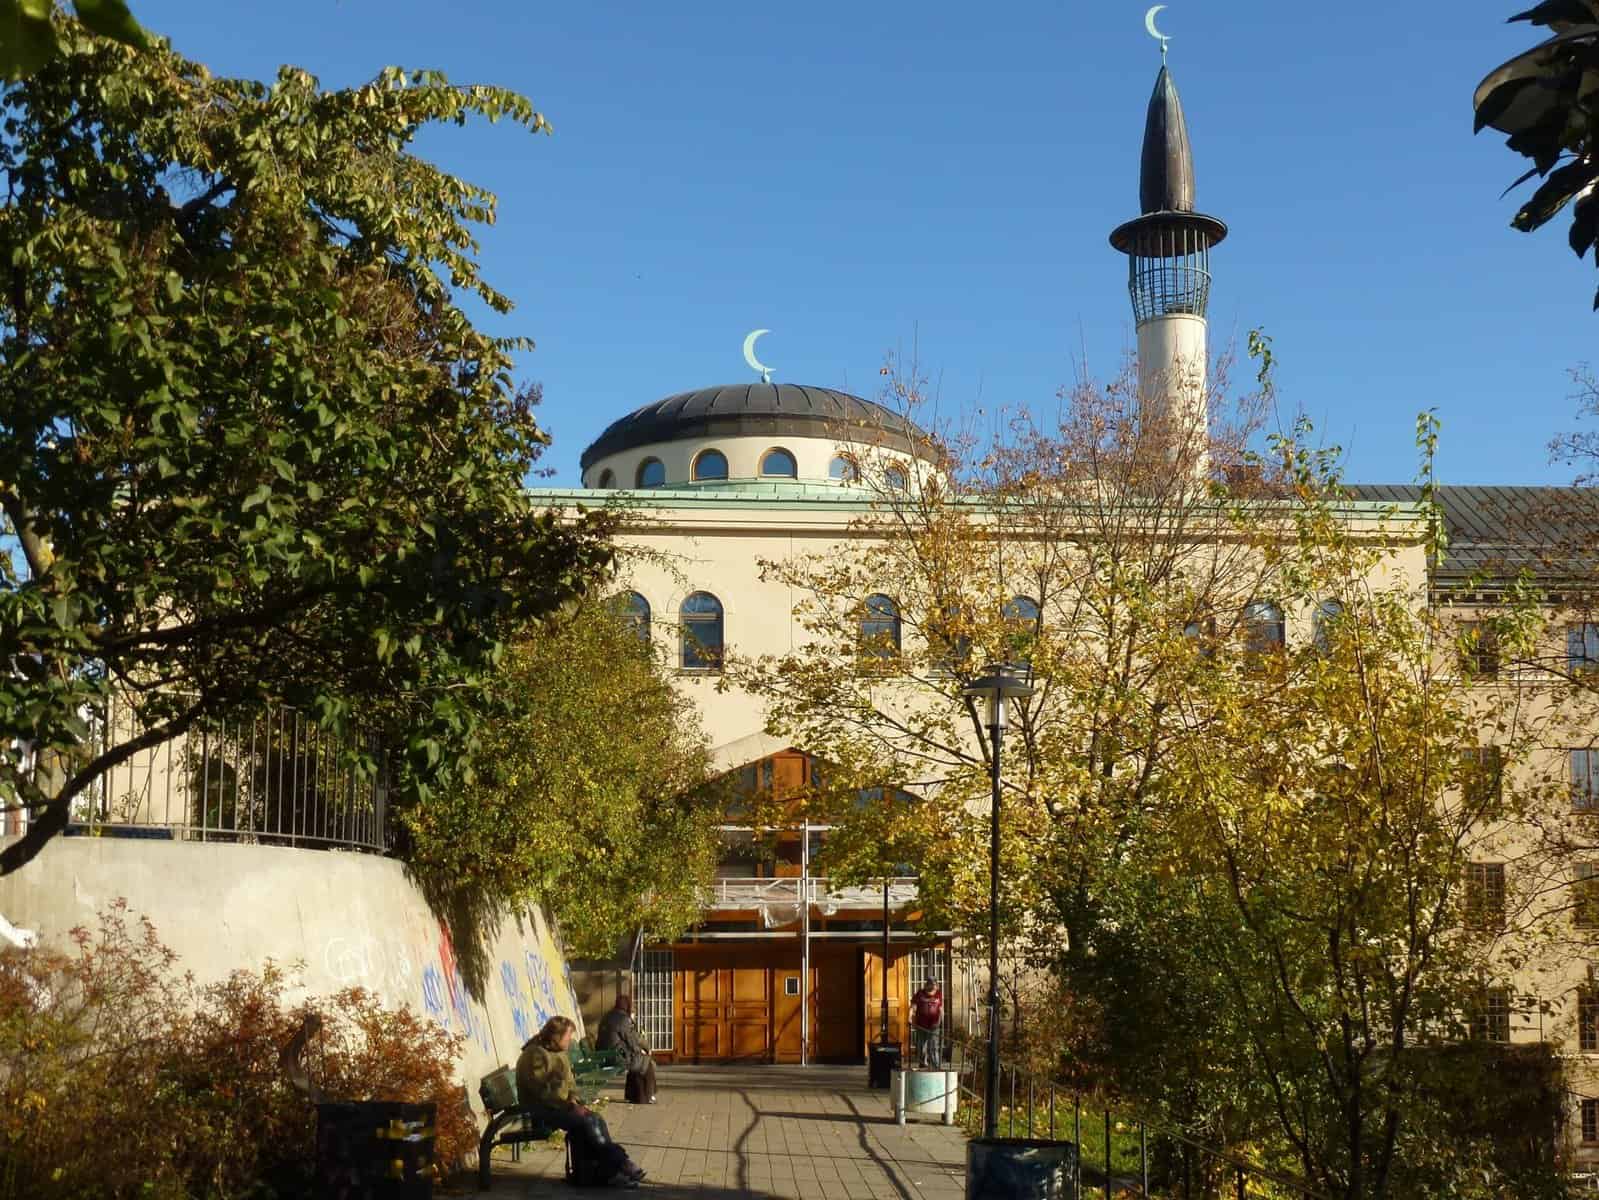 A mosque in Stockholm is shown from the street and partly obscured by trees.